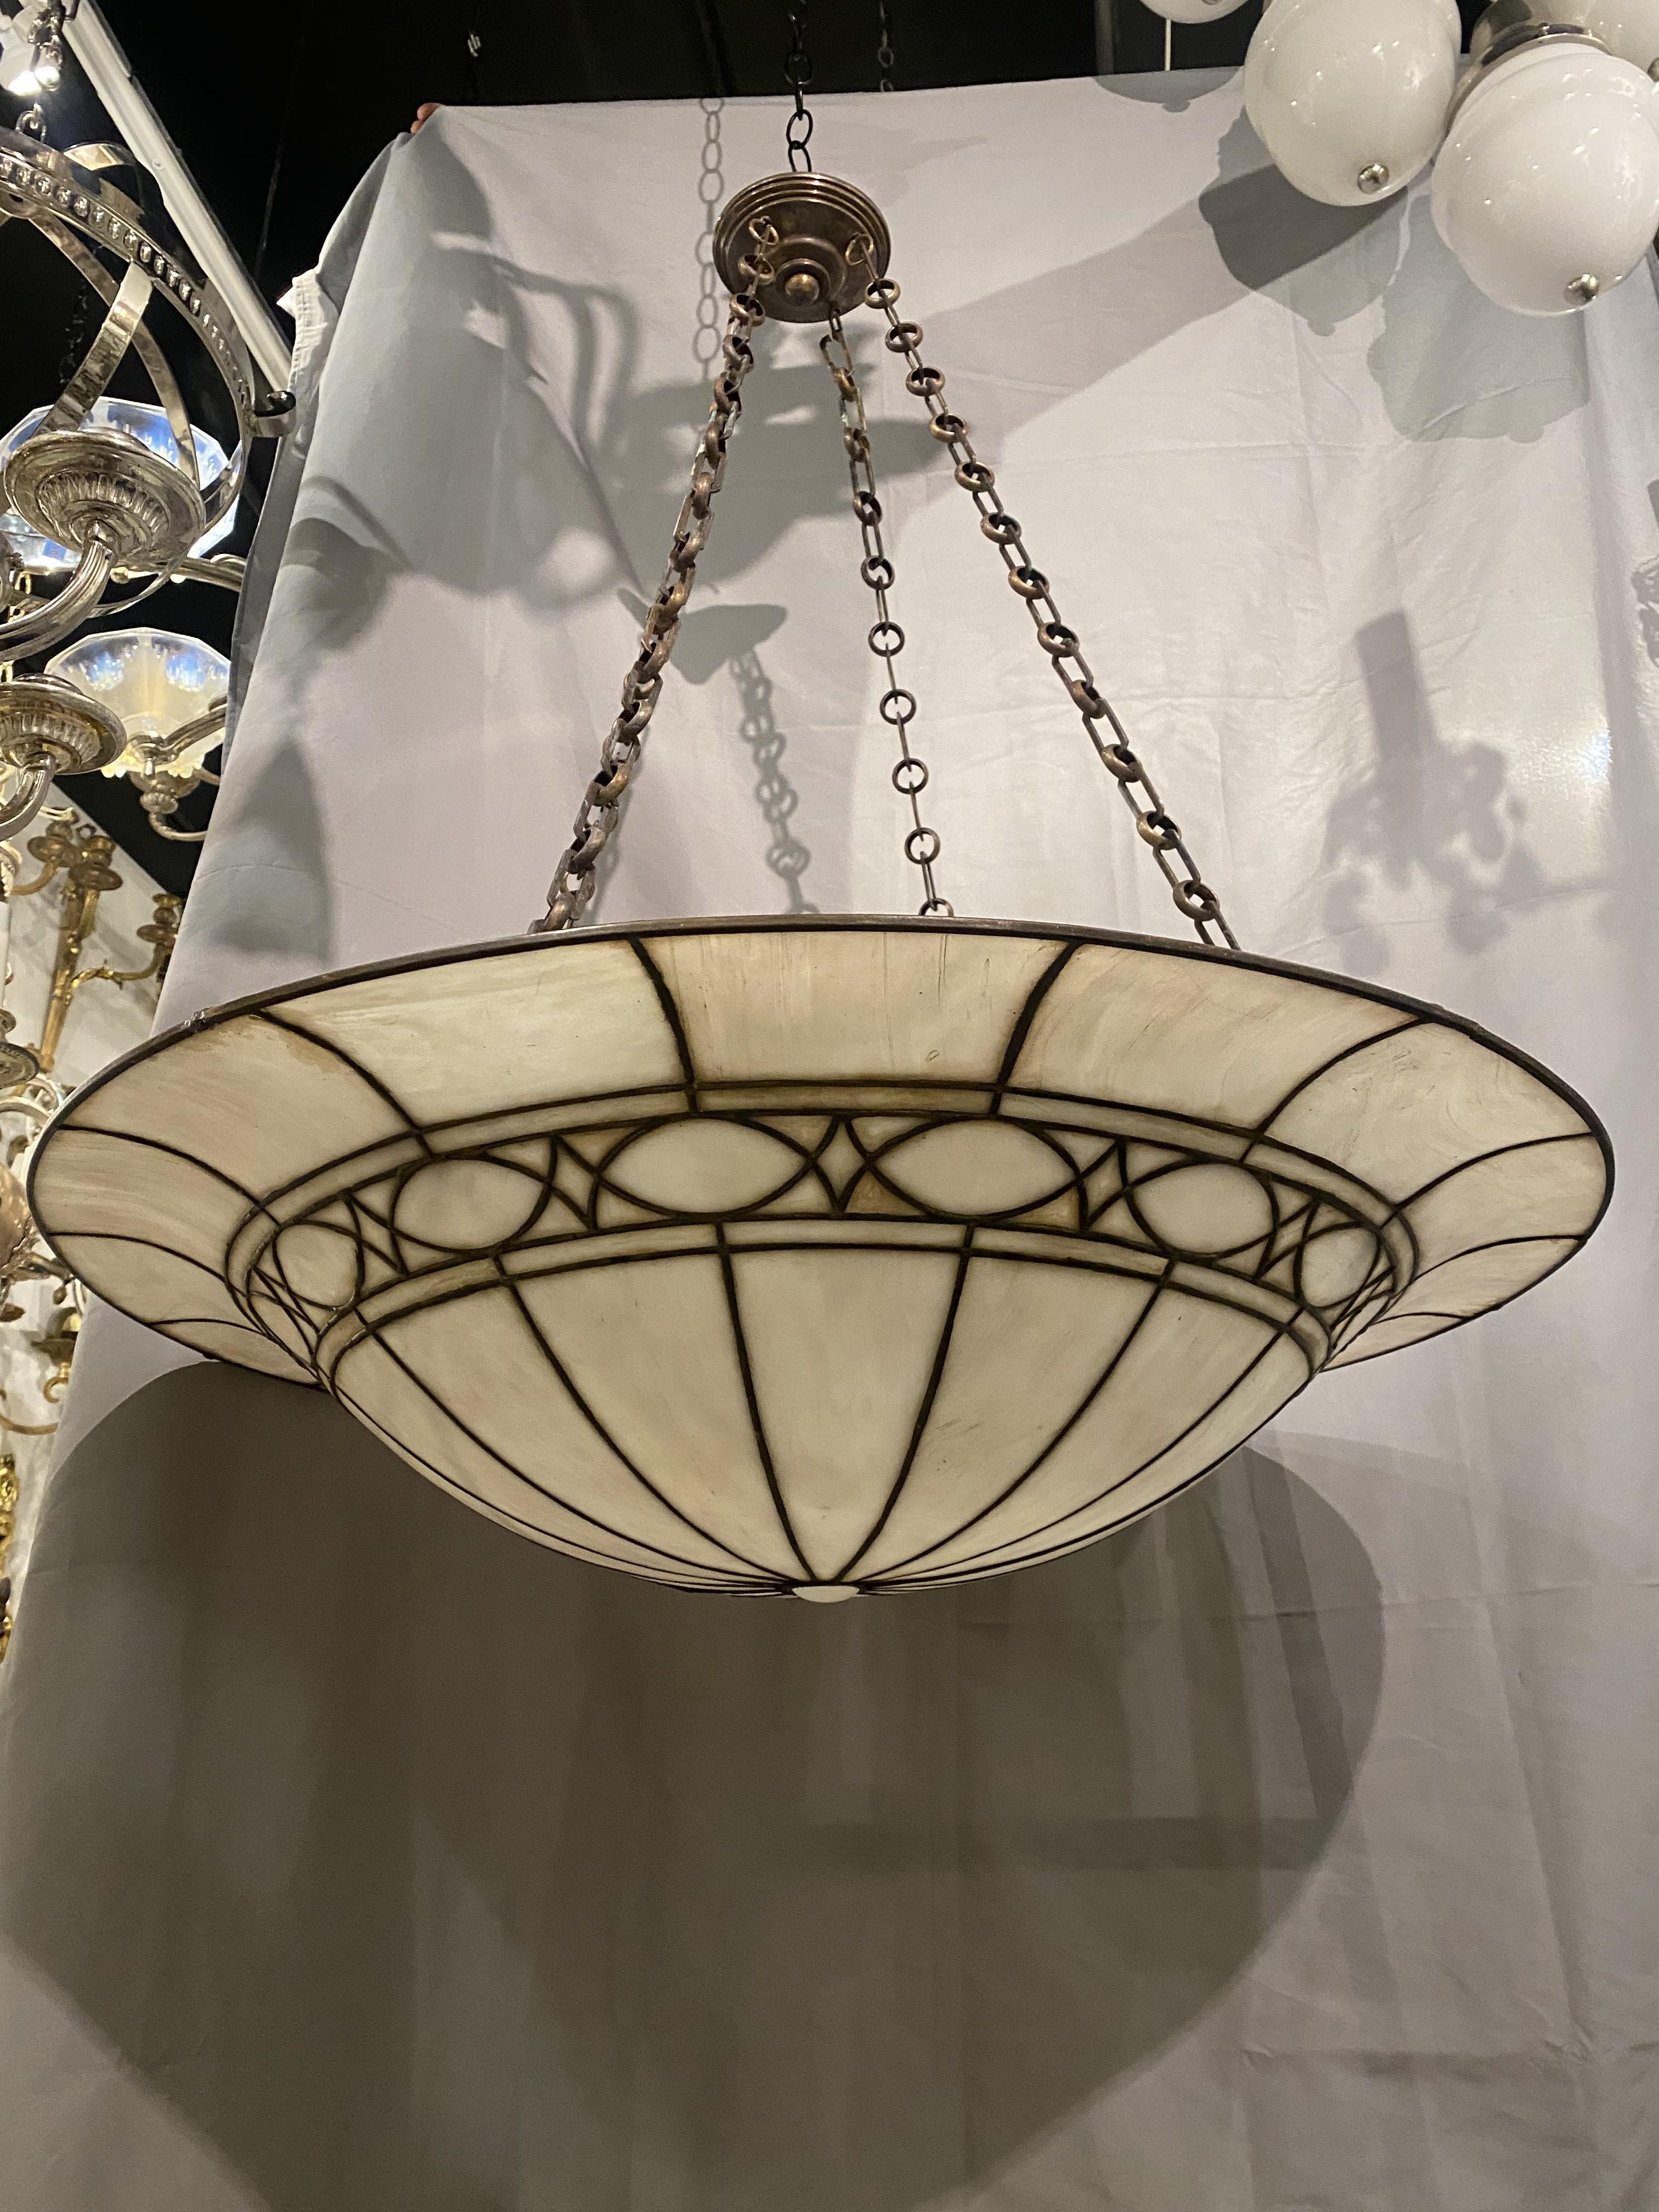 Early 20th Century Large Unusual Leaded Glass Light Fixture For Sale